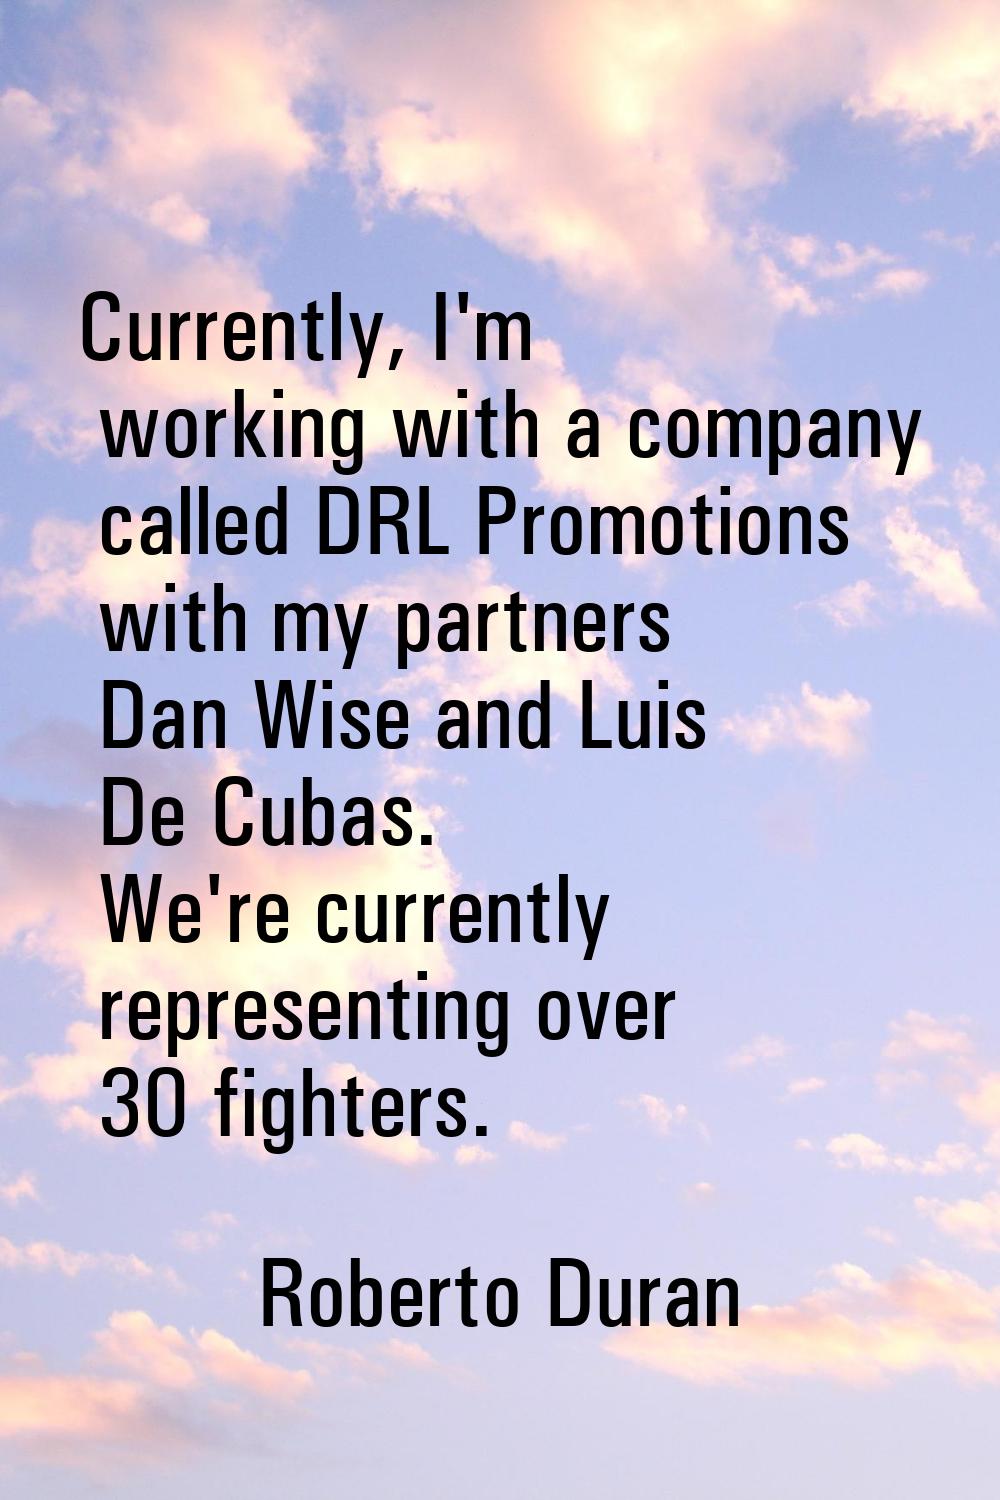 Currently, I'm working with a company called DRL Promotions with my partners Dan Wise and Luis De C